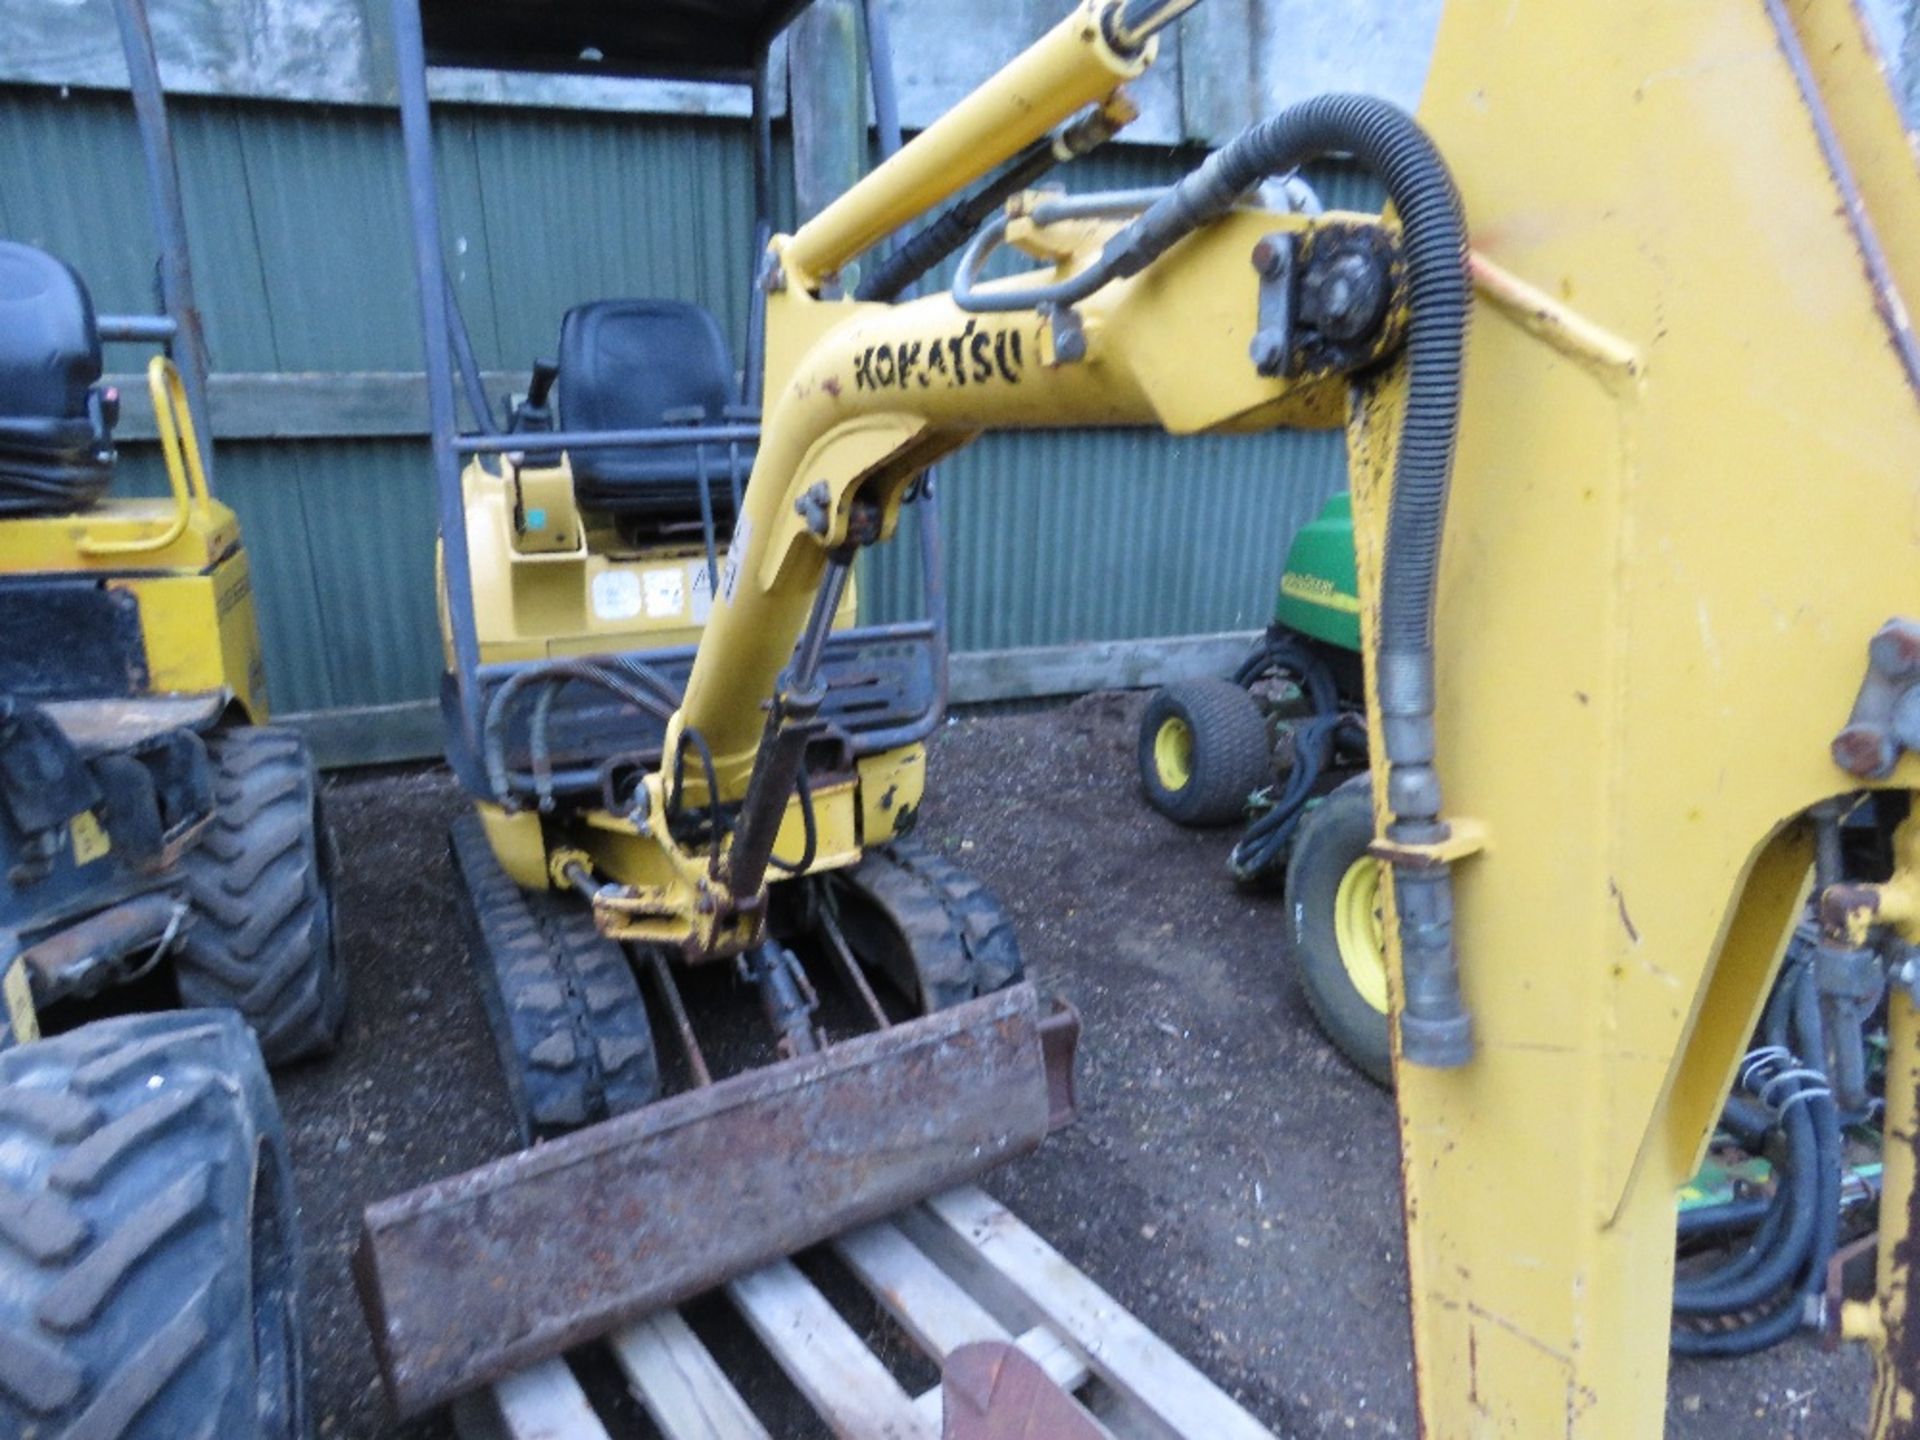 KOMATSU PC12R RUBBER TRACKED MINI EXCAVATOR WITH 3 X BUCKETS. 3731 REC HOURS. YEAR 1999 APPROX. SN:F